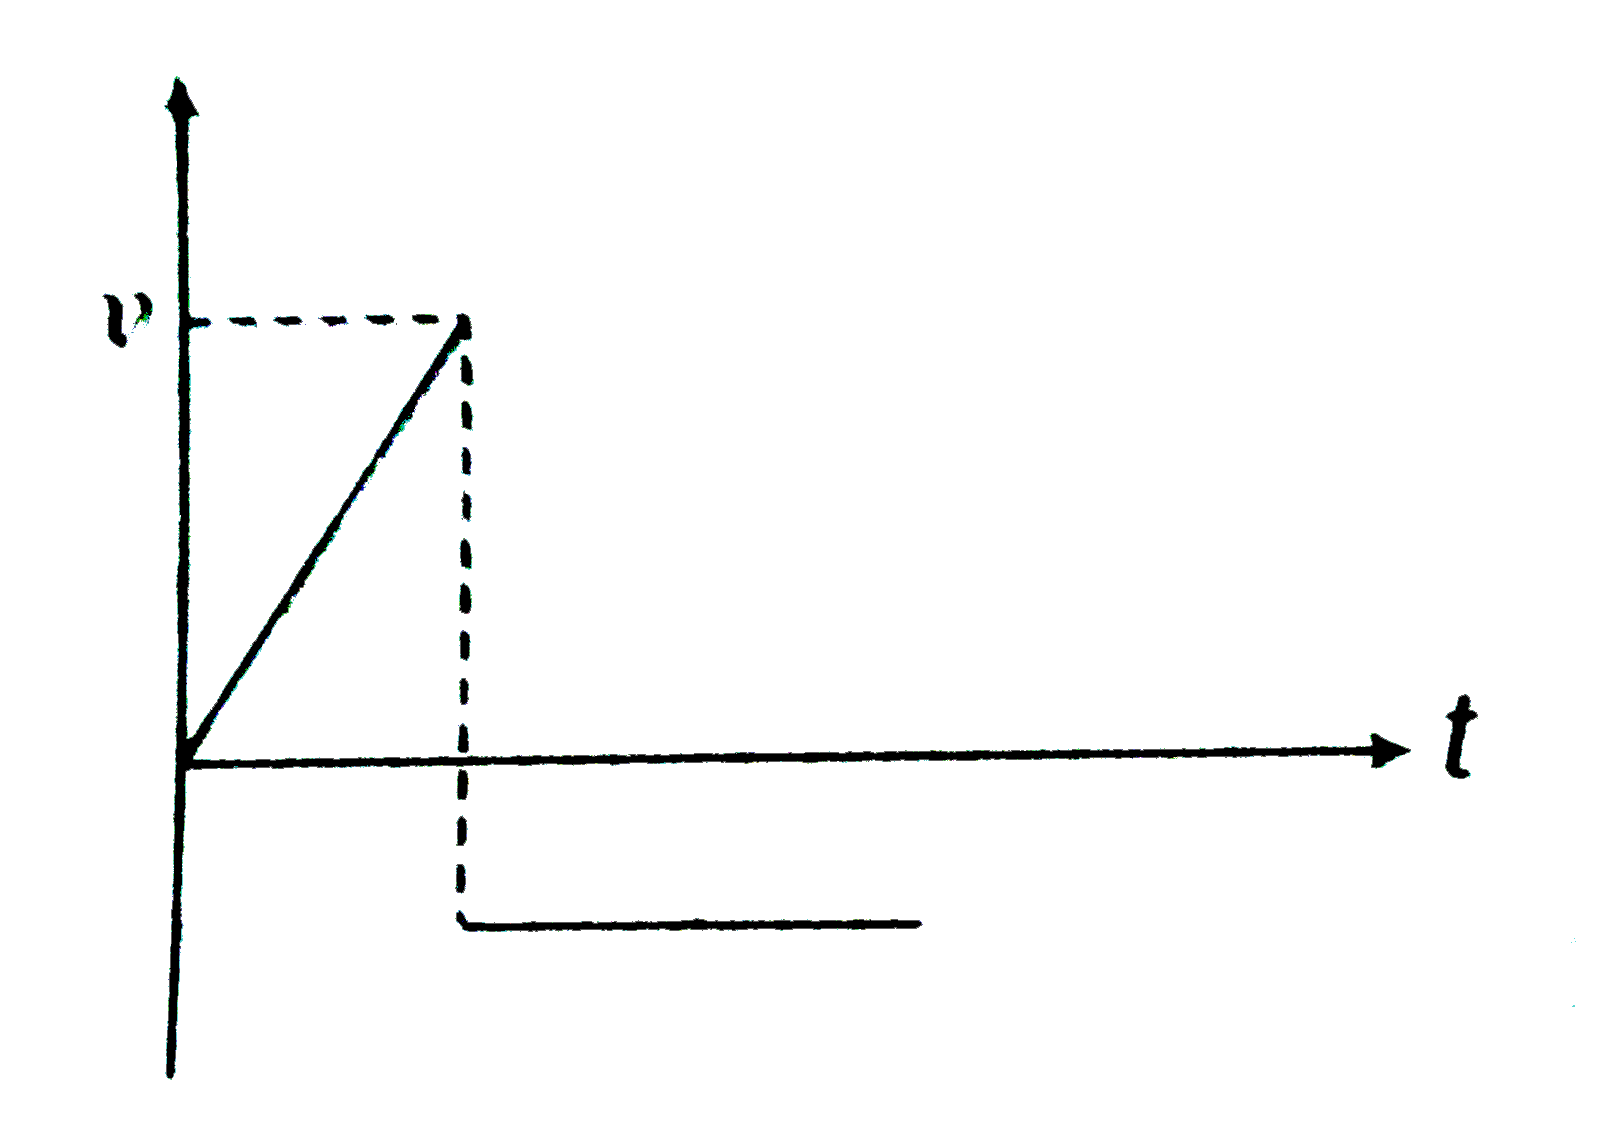 The velocity-time graph for a particle moving along X-axis is shown in the figure. The corresponding displacement-time graph is correctly shown by